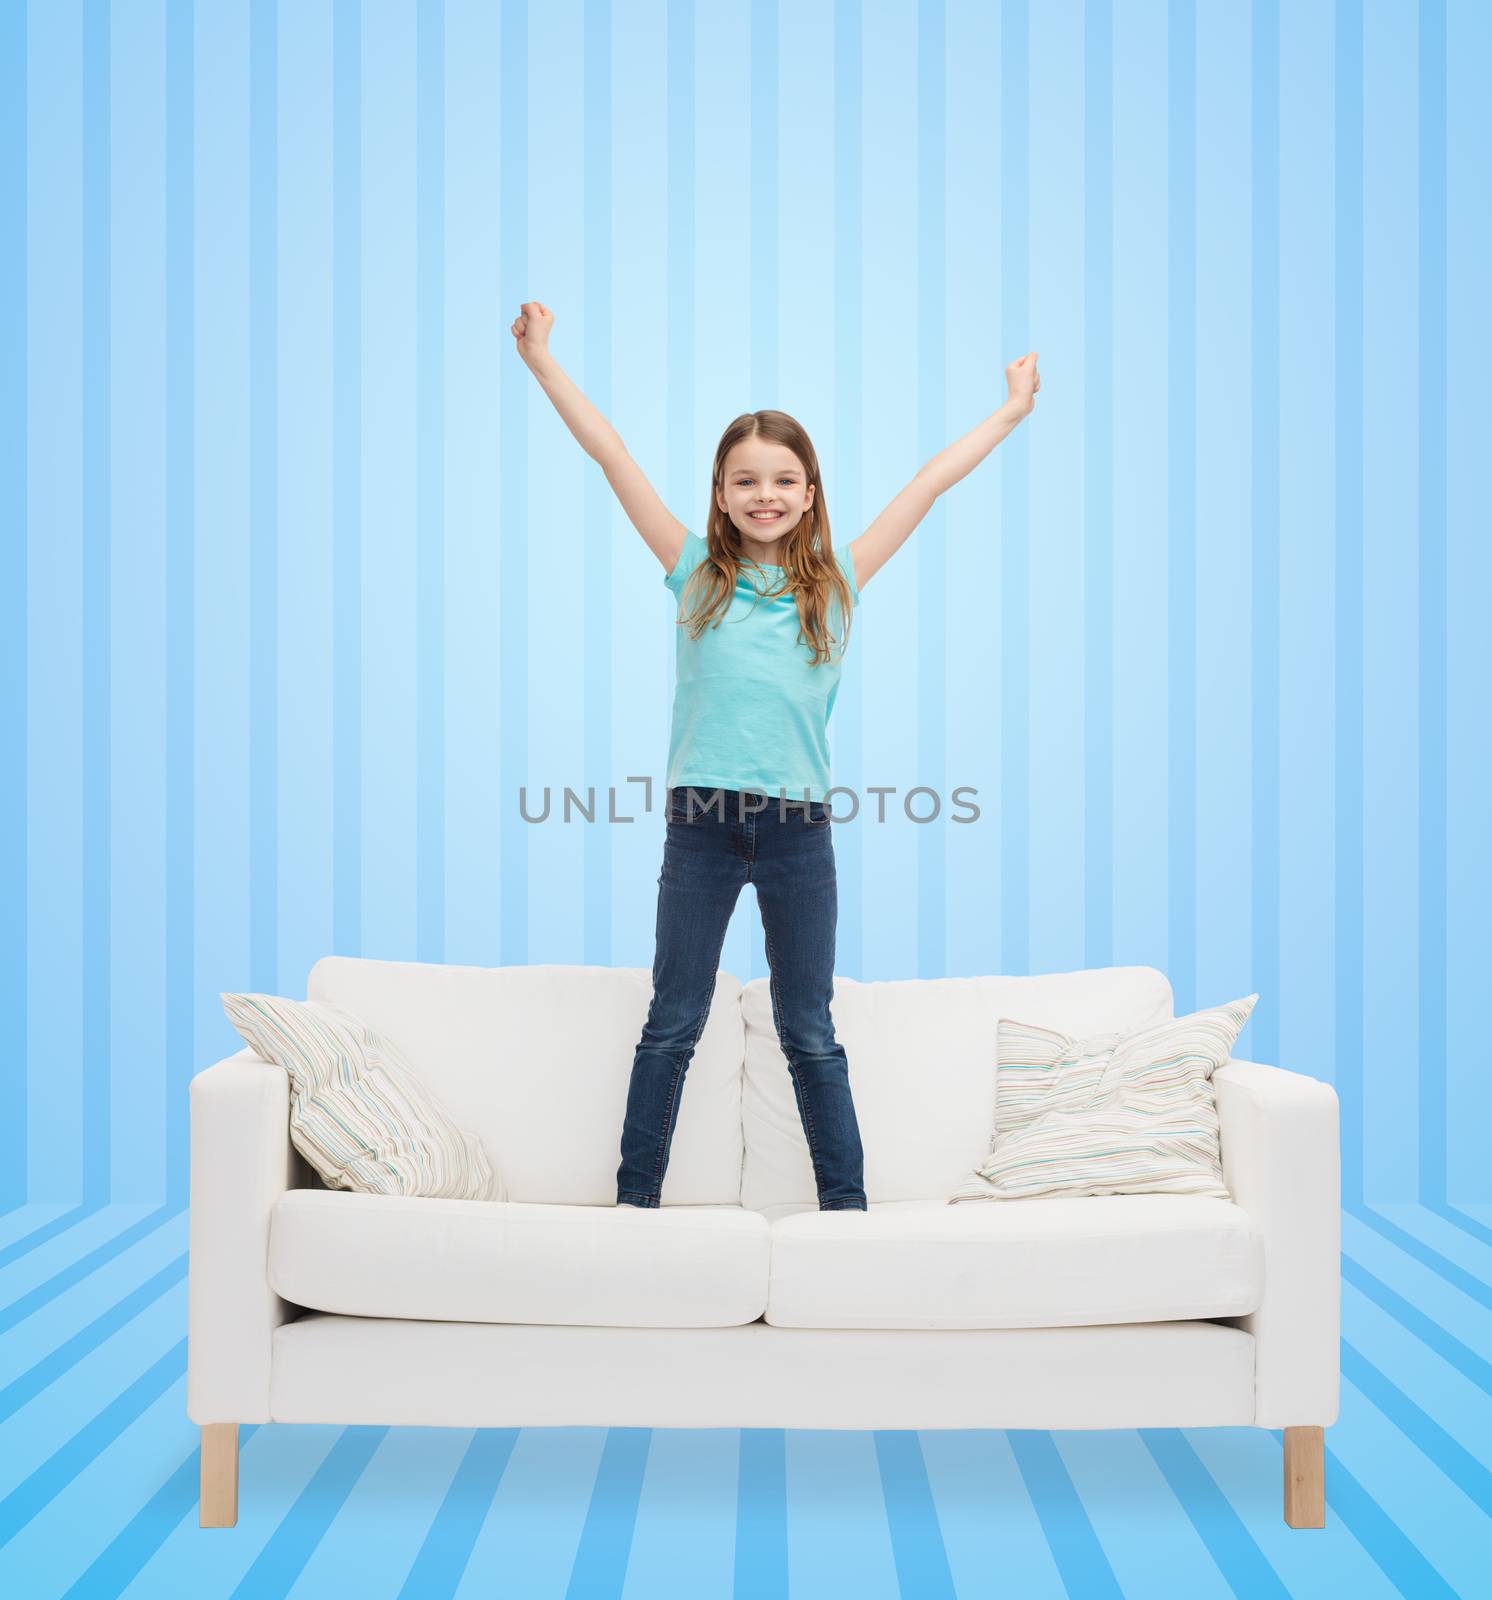 home, leisure, people and happiness concept - smiling little girl jumping on sofa over blue striped background